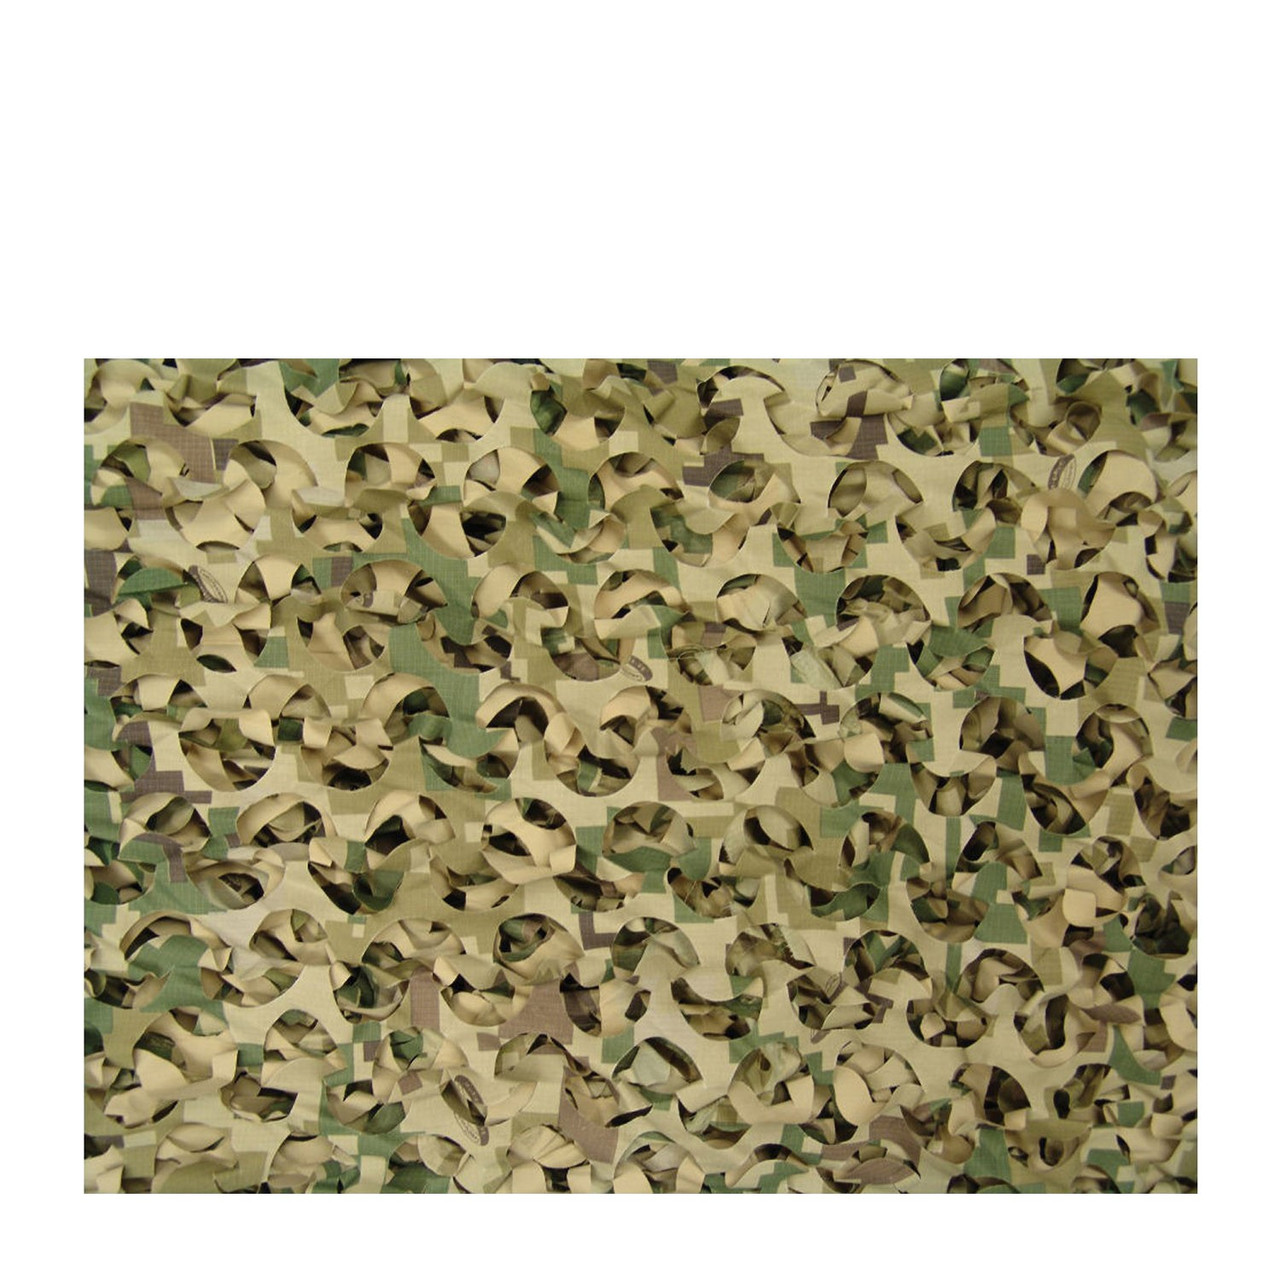 Digital Camo Net Military Camouflage Lightweight Netting Nylon Conceal Cover